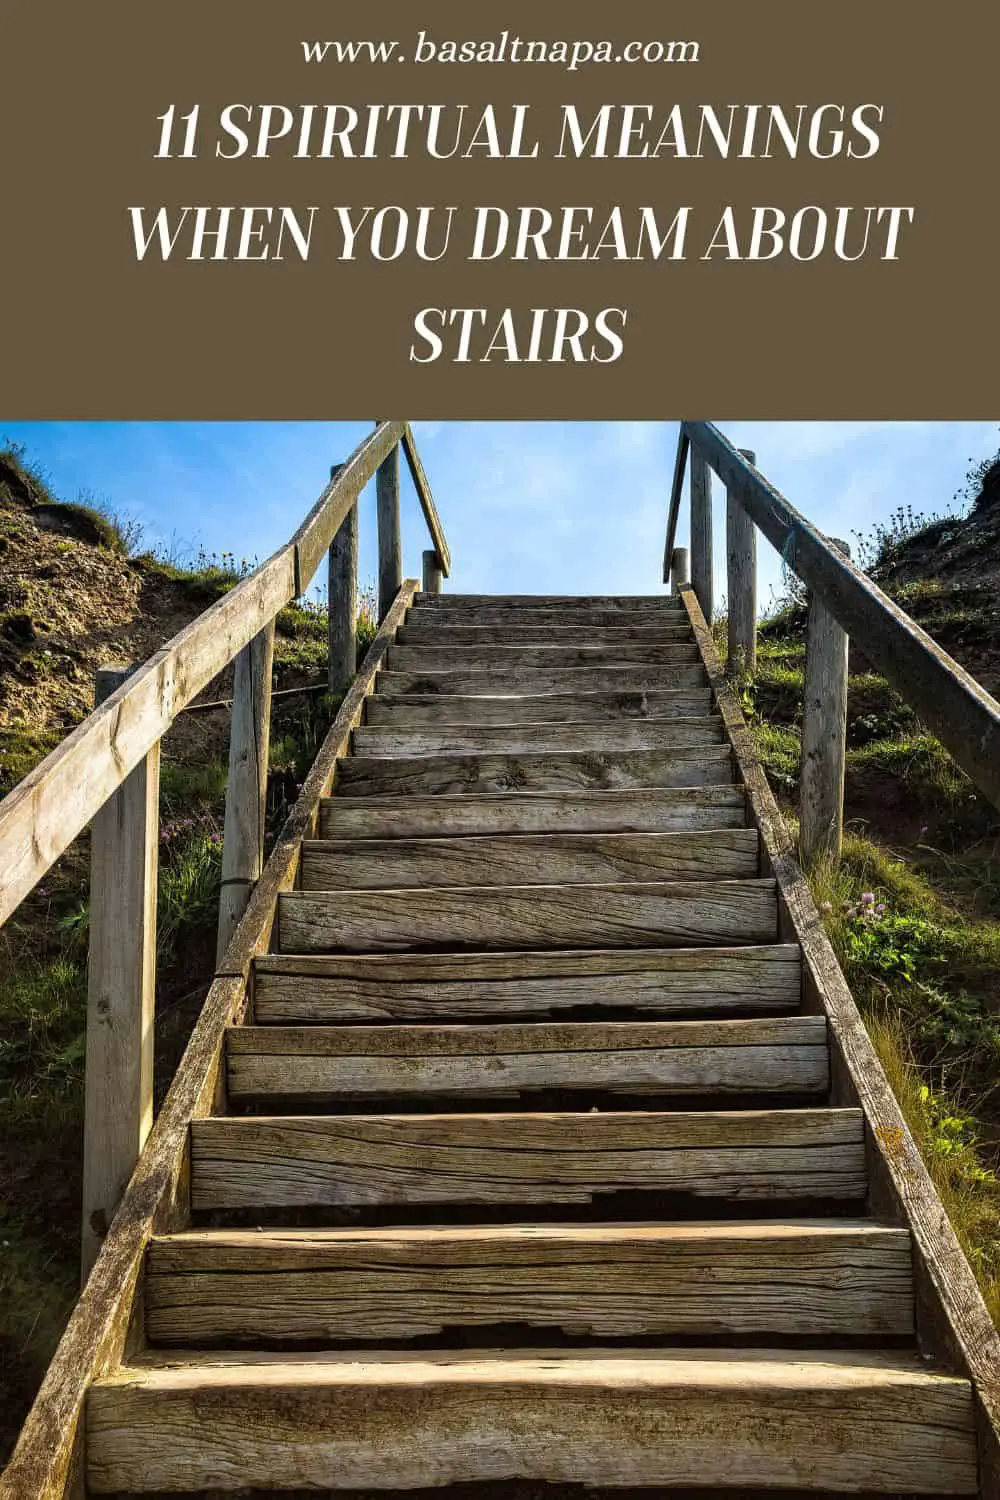 How To Interpret Dreams About Stairs